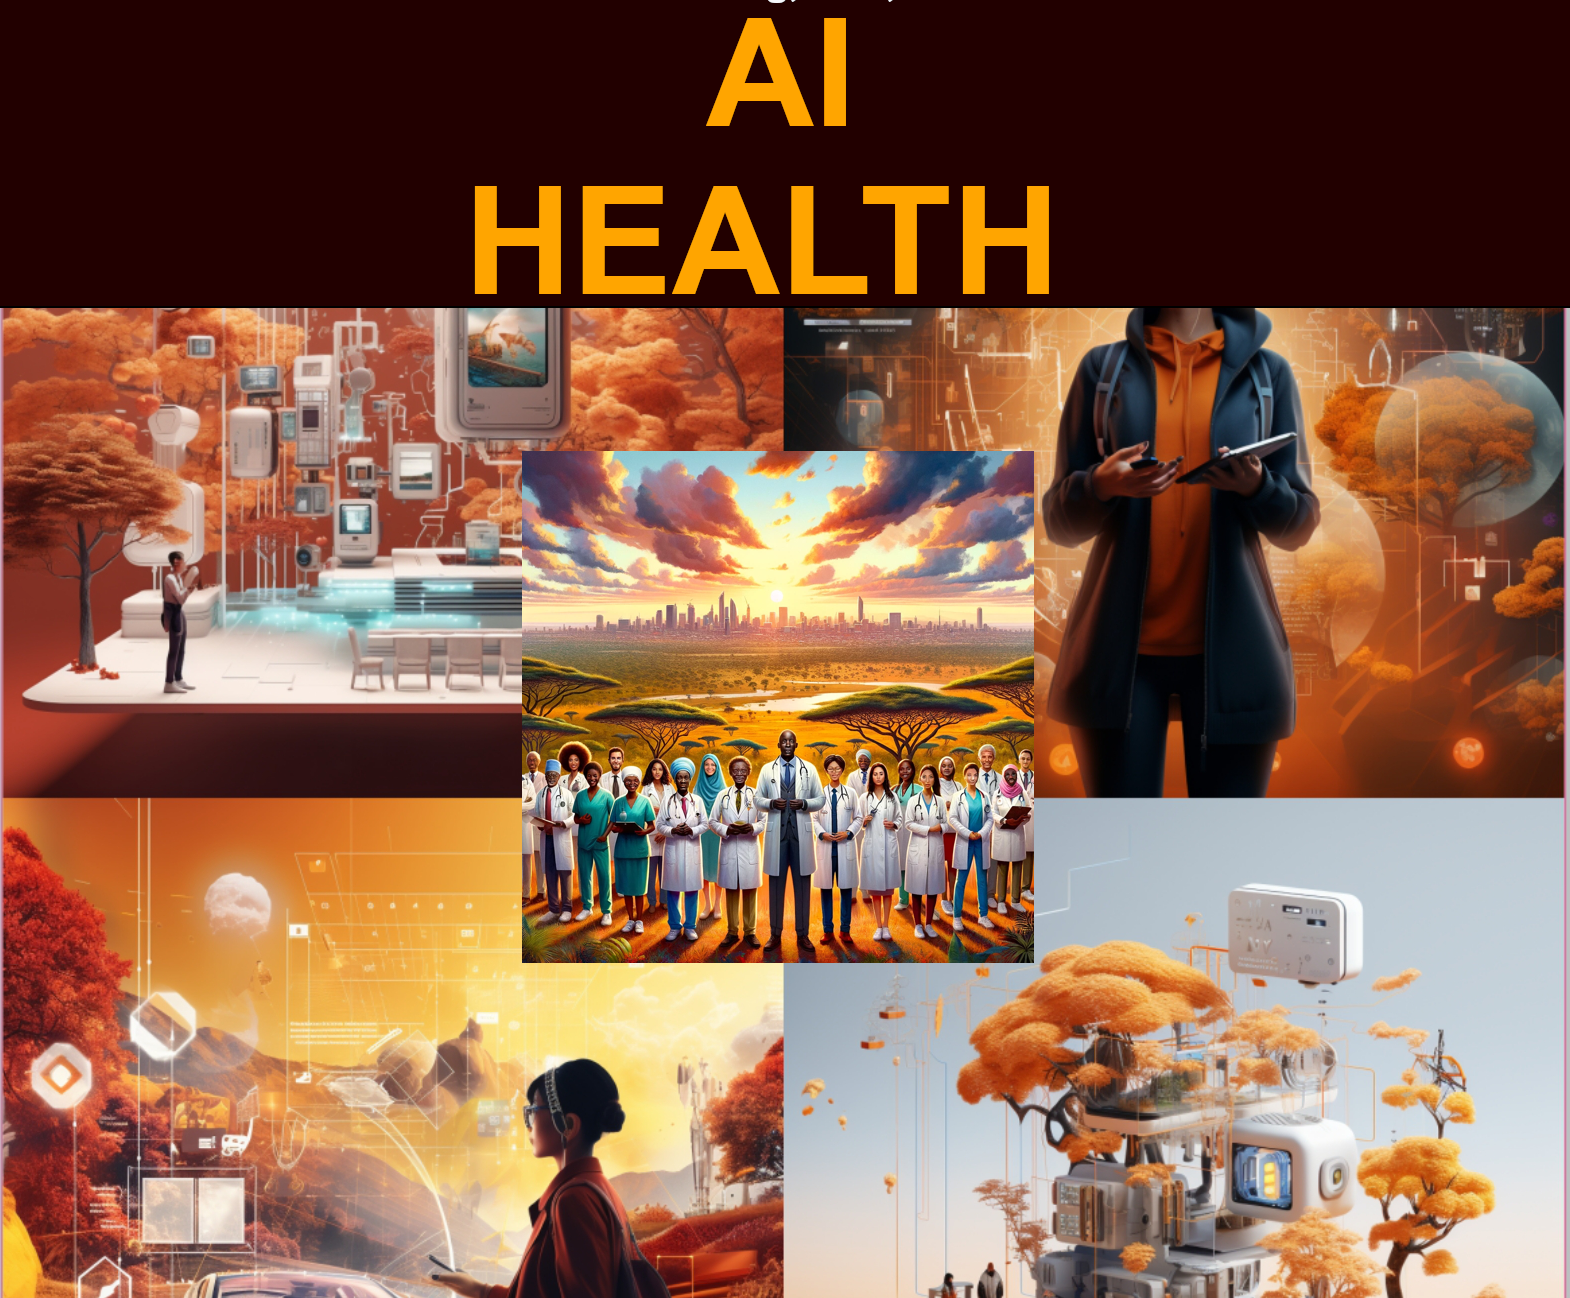 AI Health Guide focused on Africa's needs